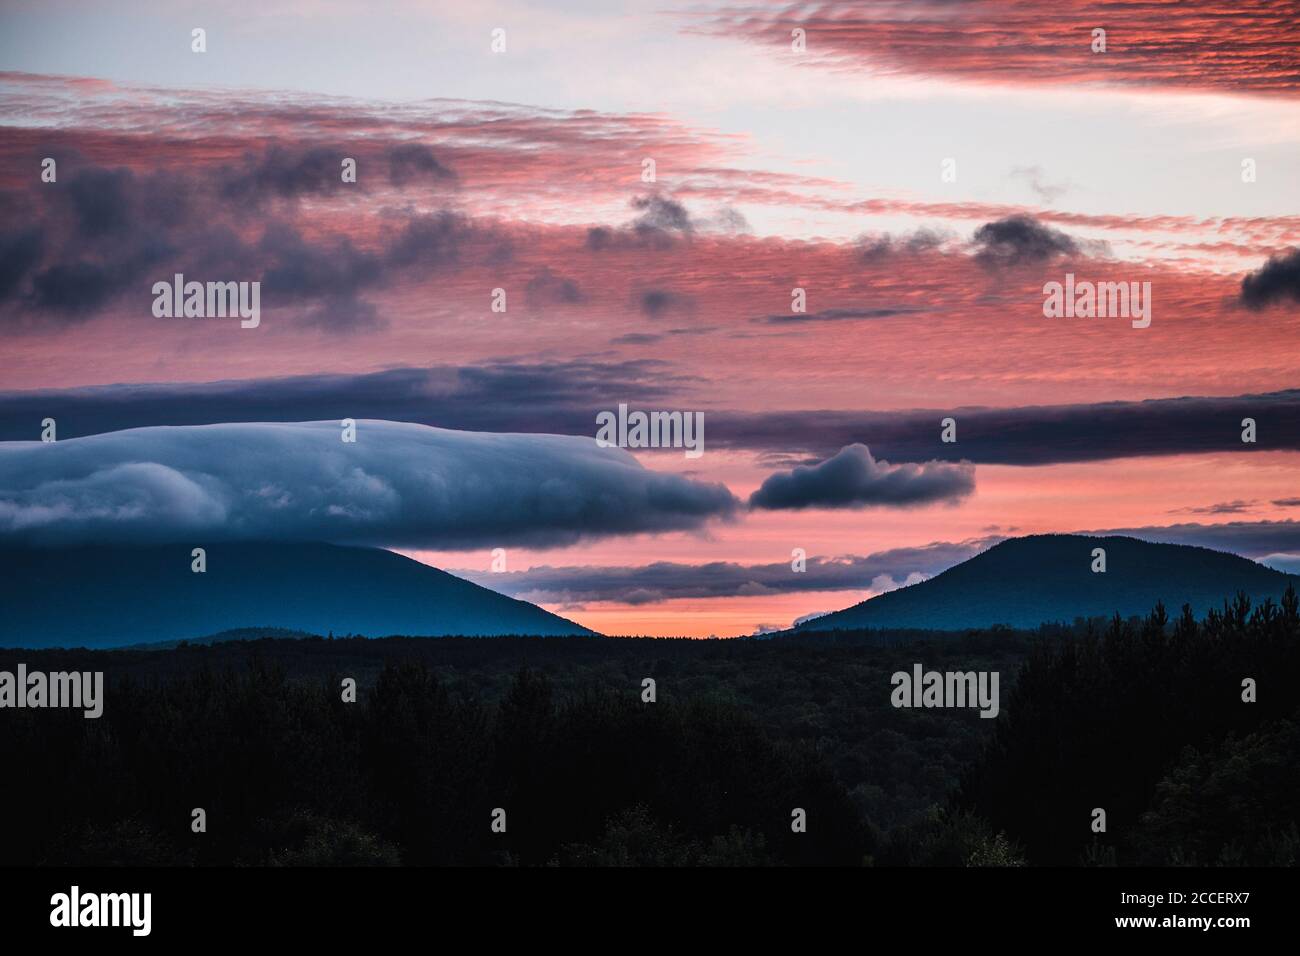 Vibrant red and pink sunset and clouds over distant mountains in Maine Stock Photo